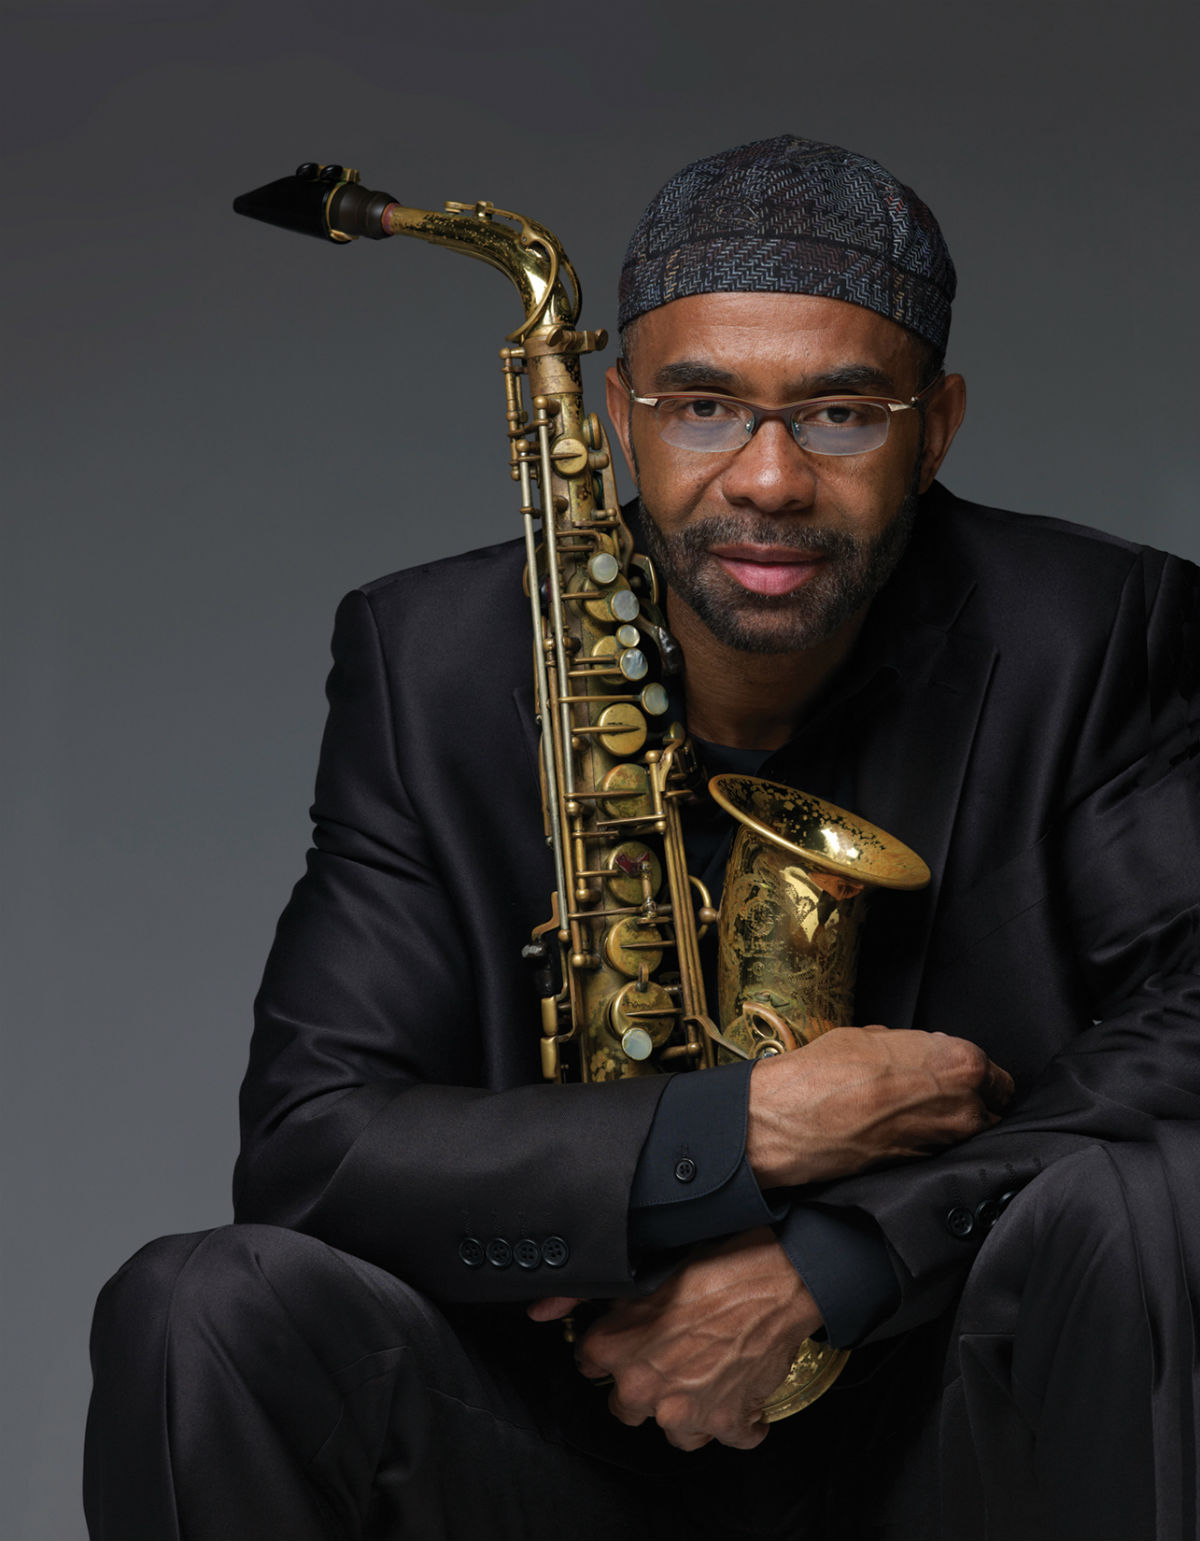 The festival stages Kenny Garrett’s modern jazz featuring his disc ‘Do Your Dance!’